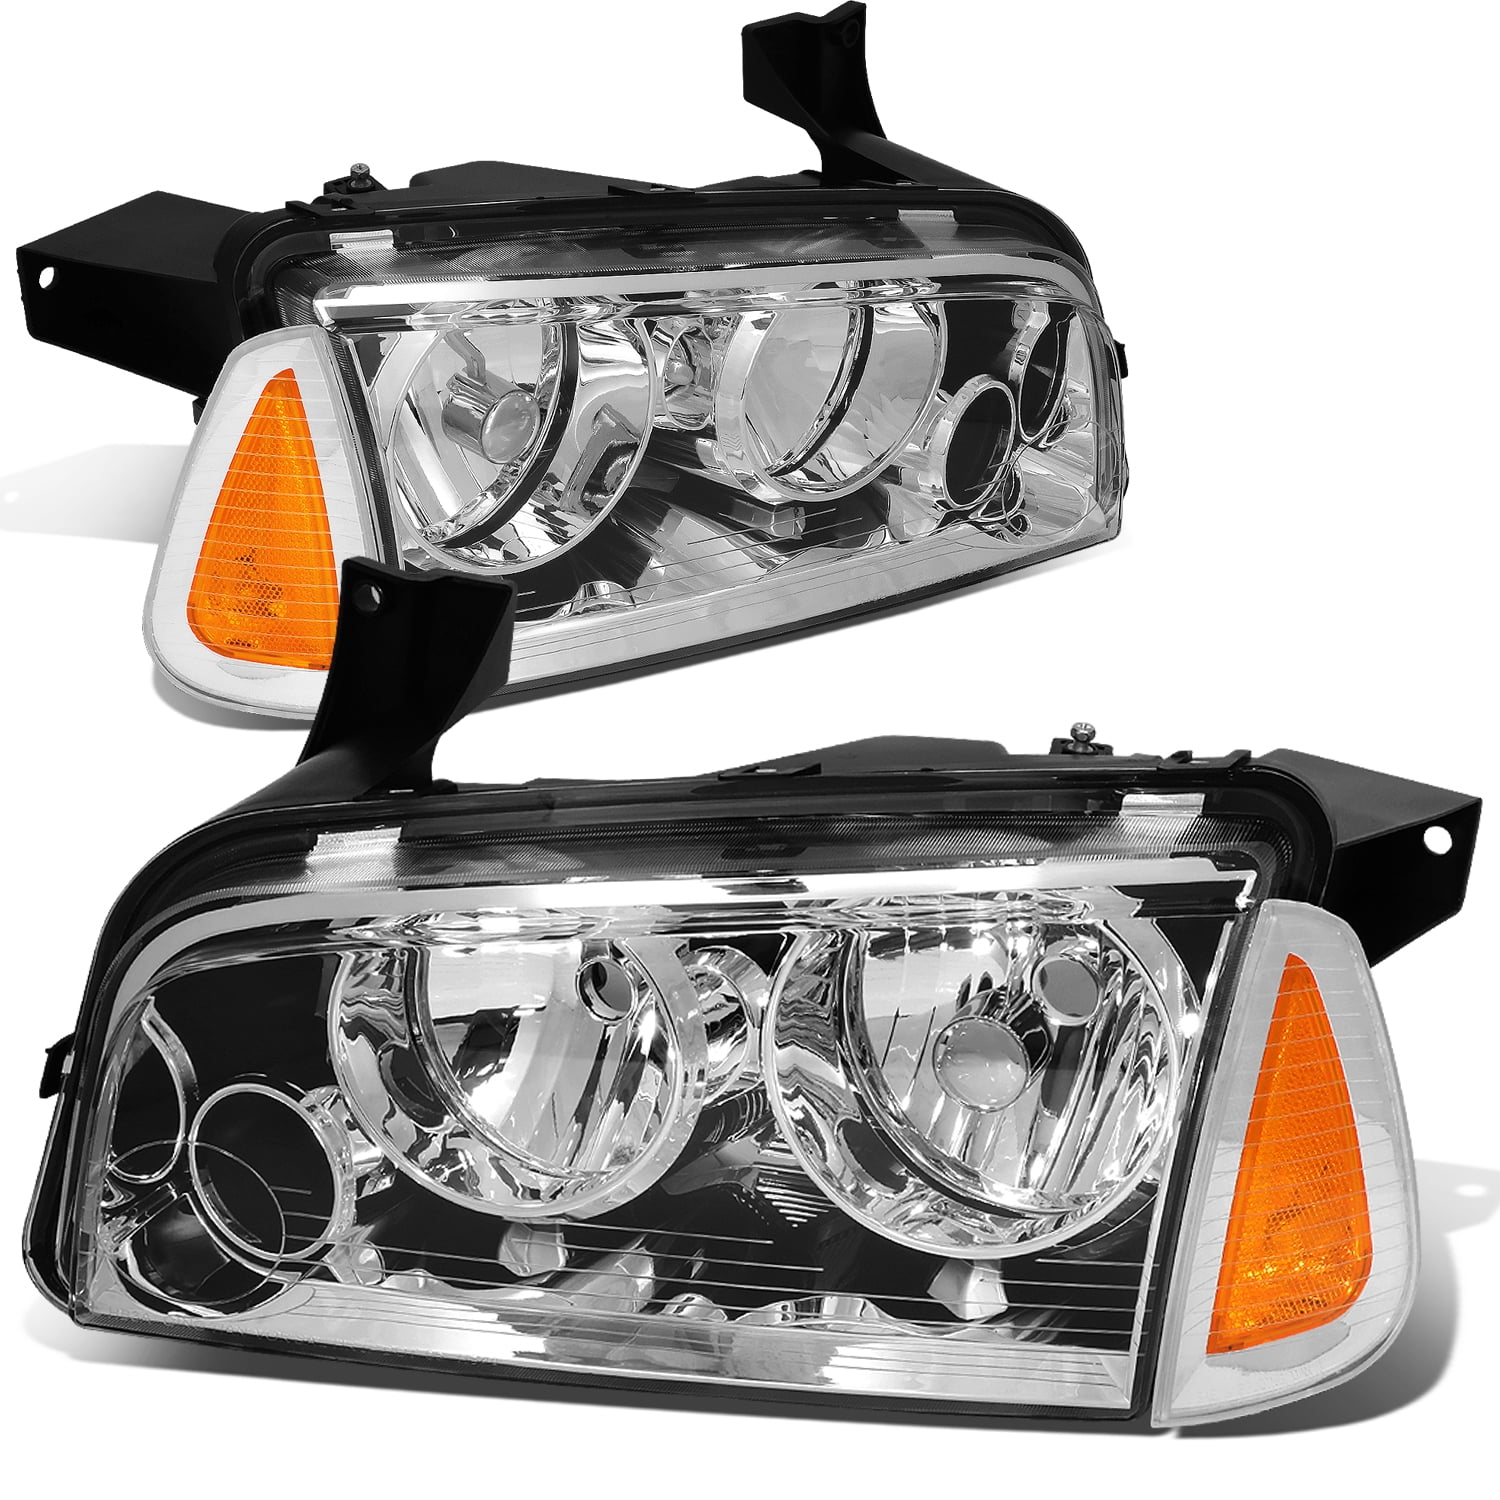 DNA Motoring HL-OH-CHA05-4P-BK-CL1 Black Housing Headlights Replacement For 06-10 Charger 